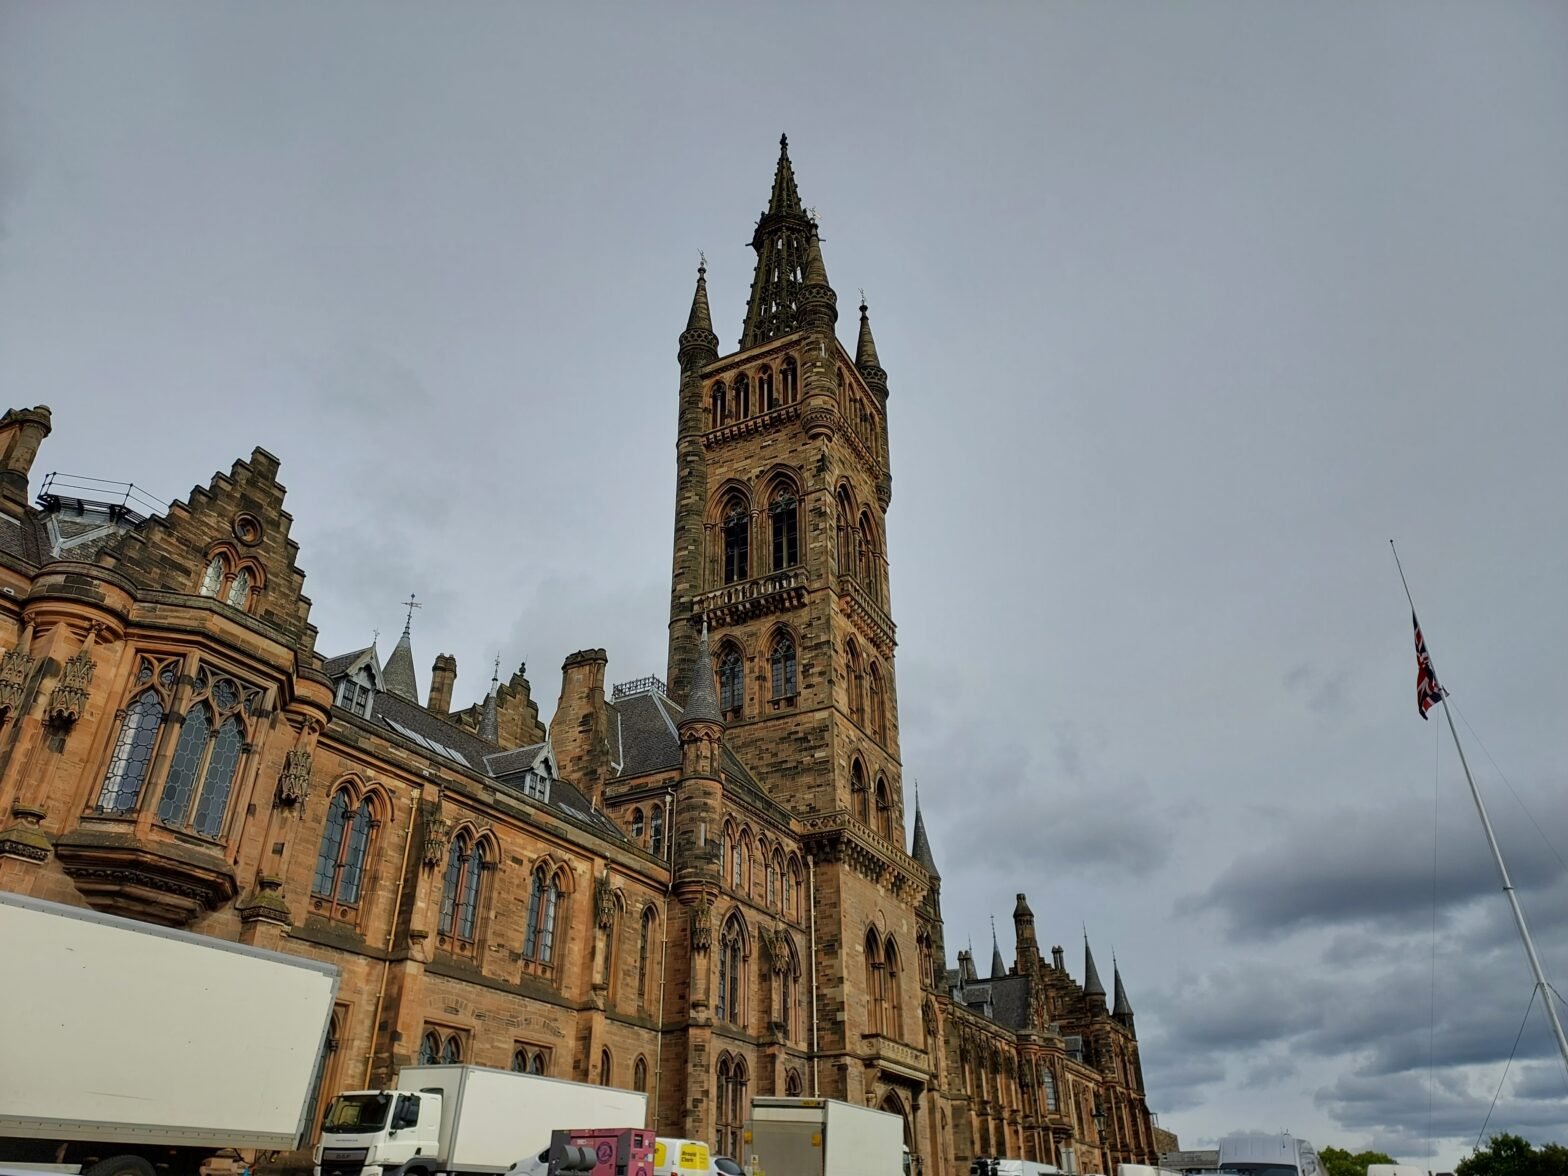 A photograph of the main building of the University of Glasgow. The sky is cloudy and the UK flag is visible.